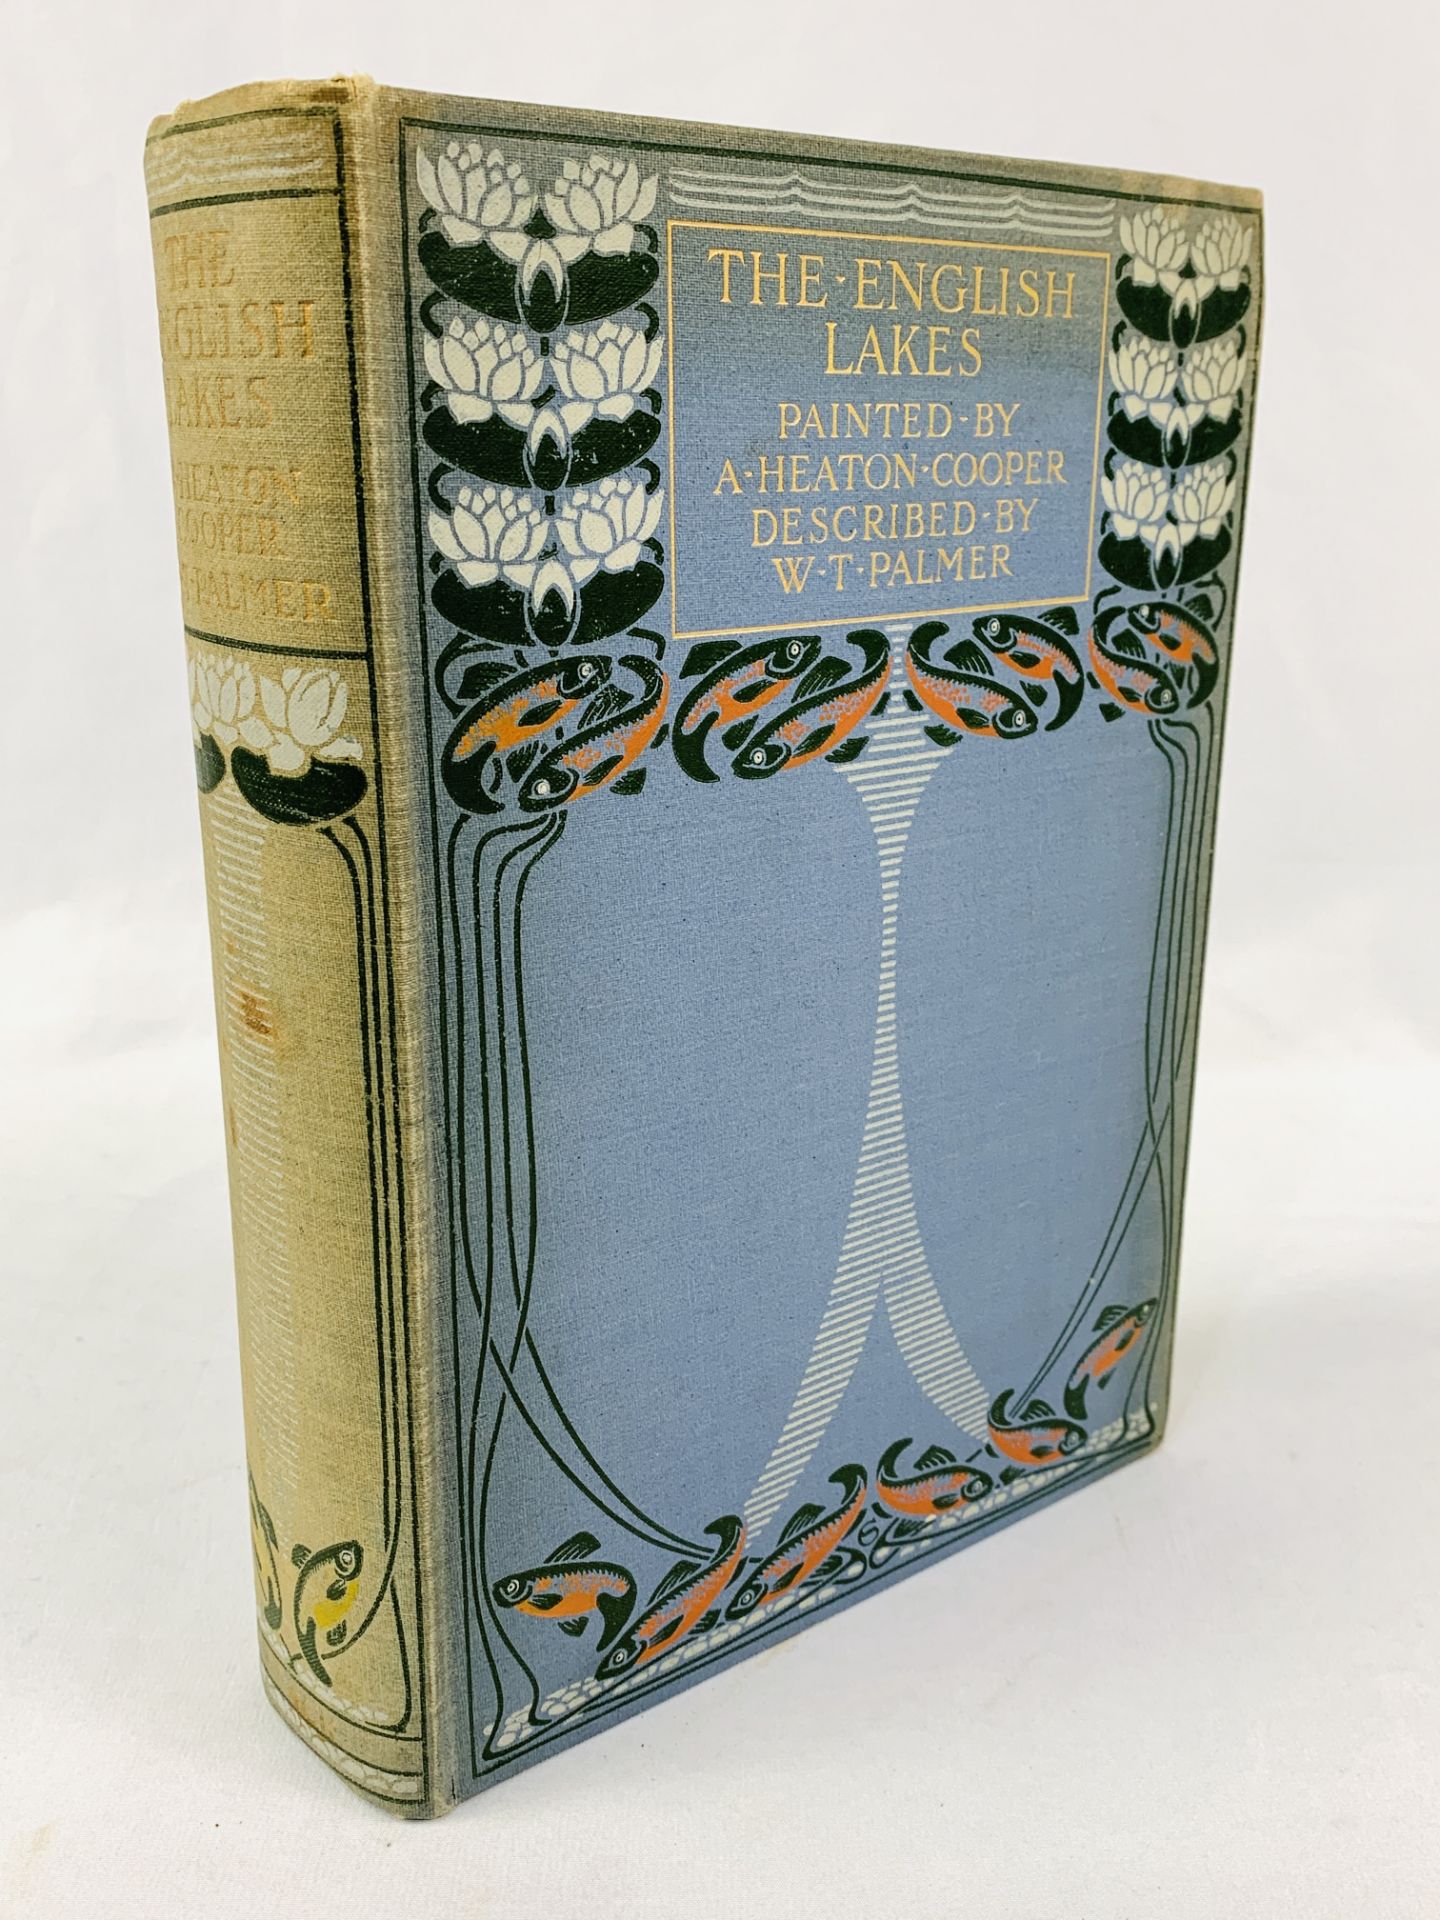 The English Lakes Painted by A. Heaton Cooper, William Palmer, 1908, 2nd edition.